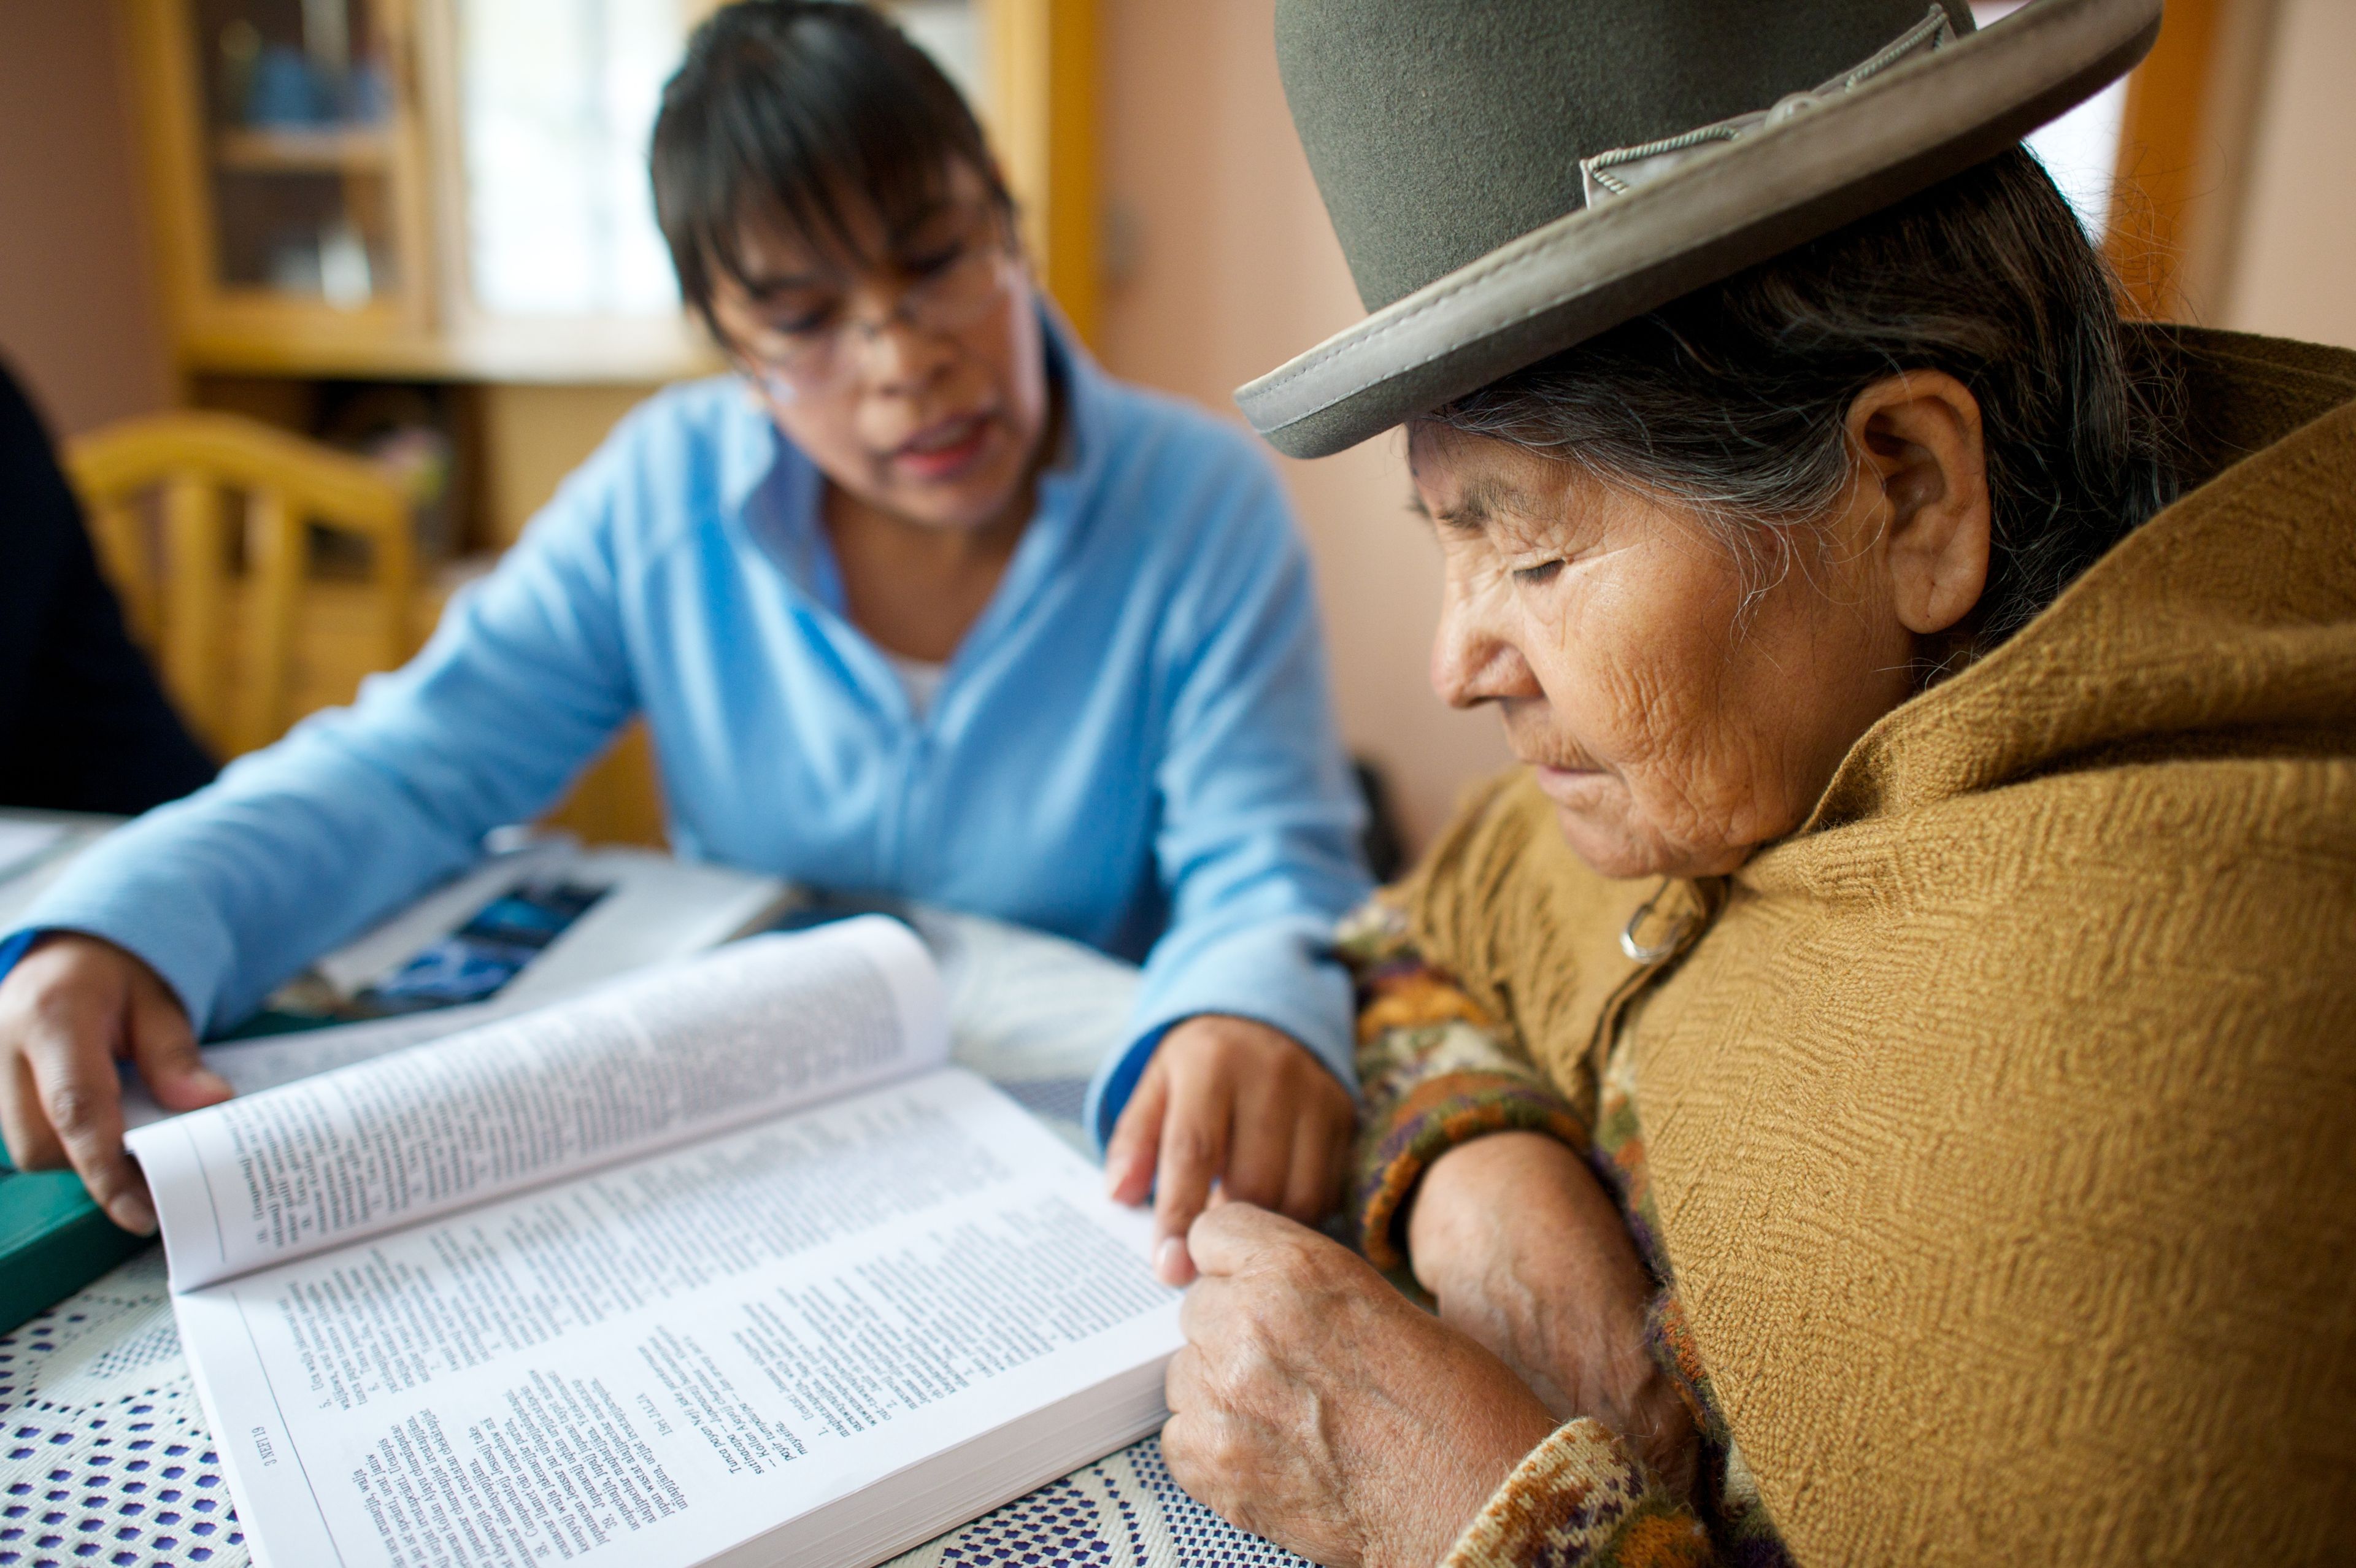 Two women from Bolivia sitting at a table and reading together.